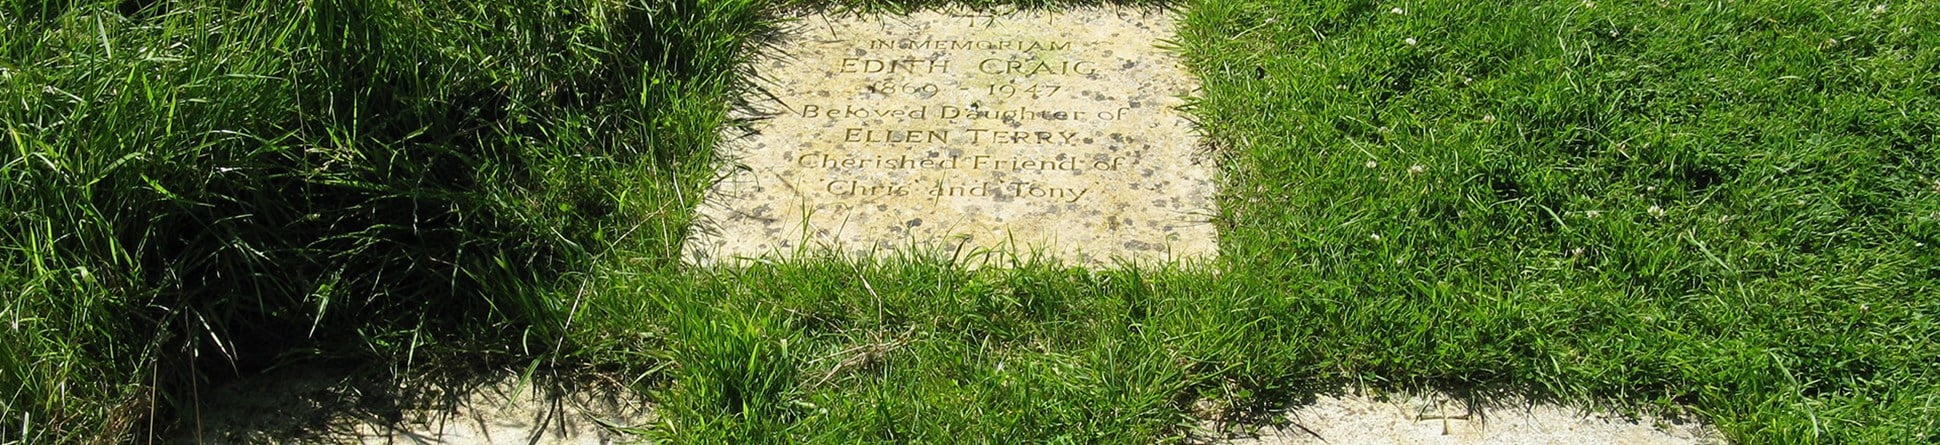 Grave markers in the churchyard of St John the Baptist Church